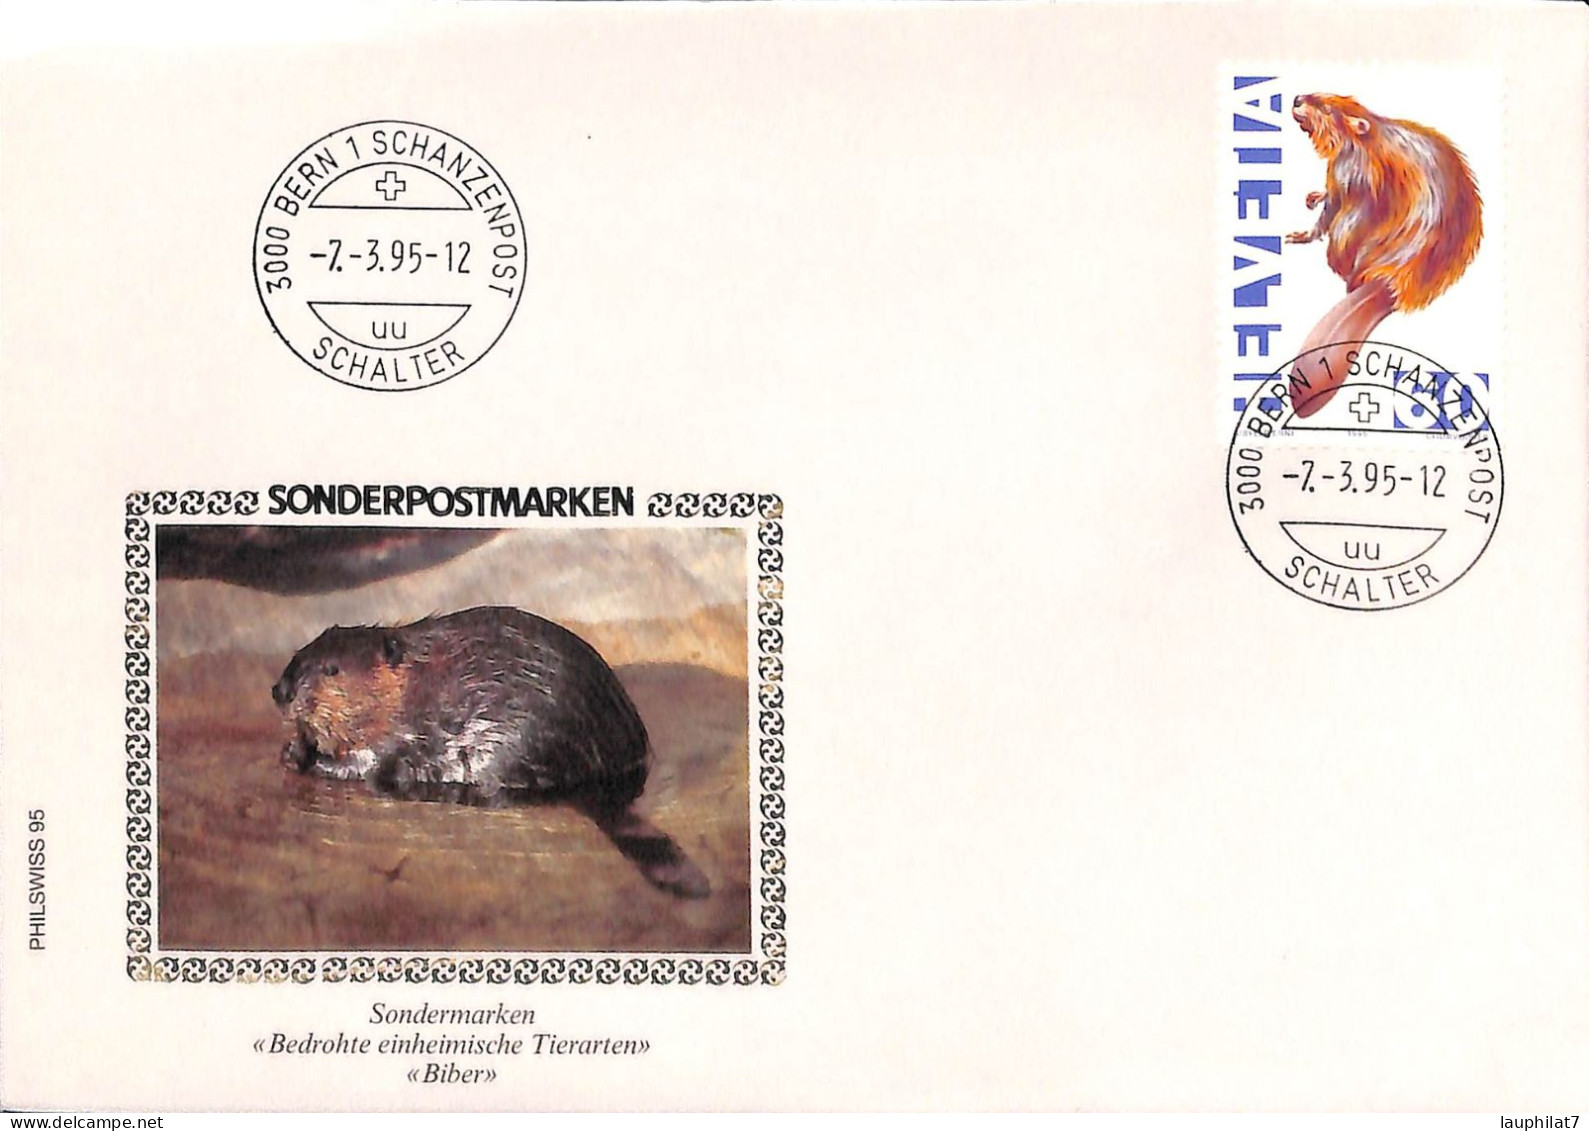 [900105]TB//-Suisse  - FDC, Documents, BERN 1 SCHANZENPOST, Animaux, Rongeurs - Nager